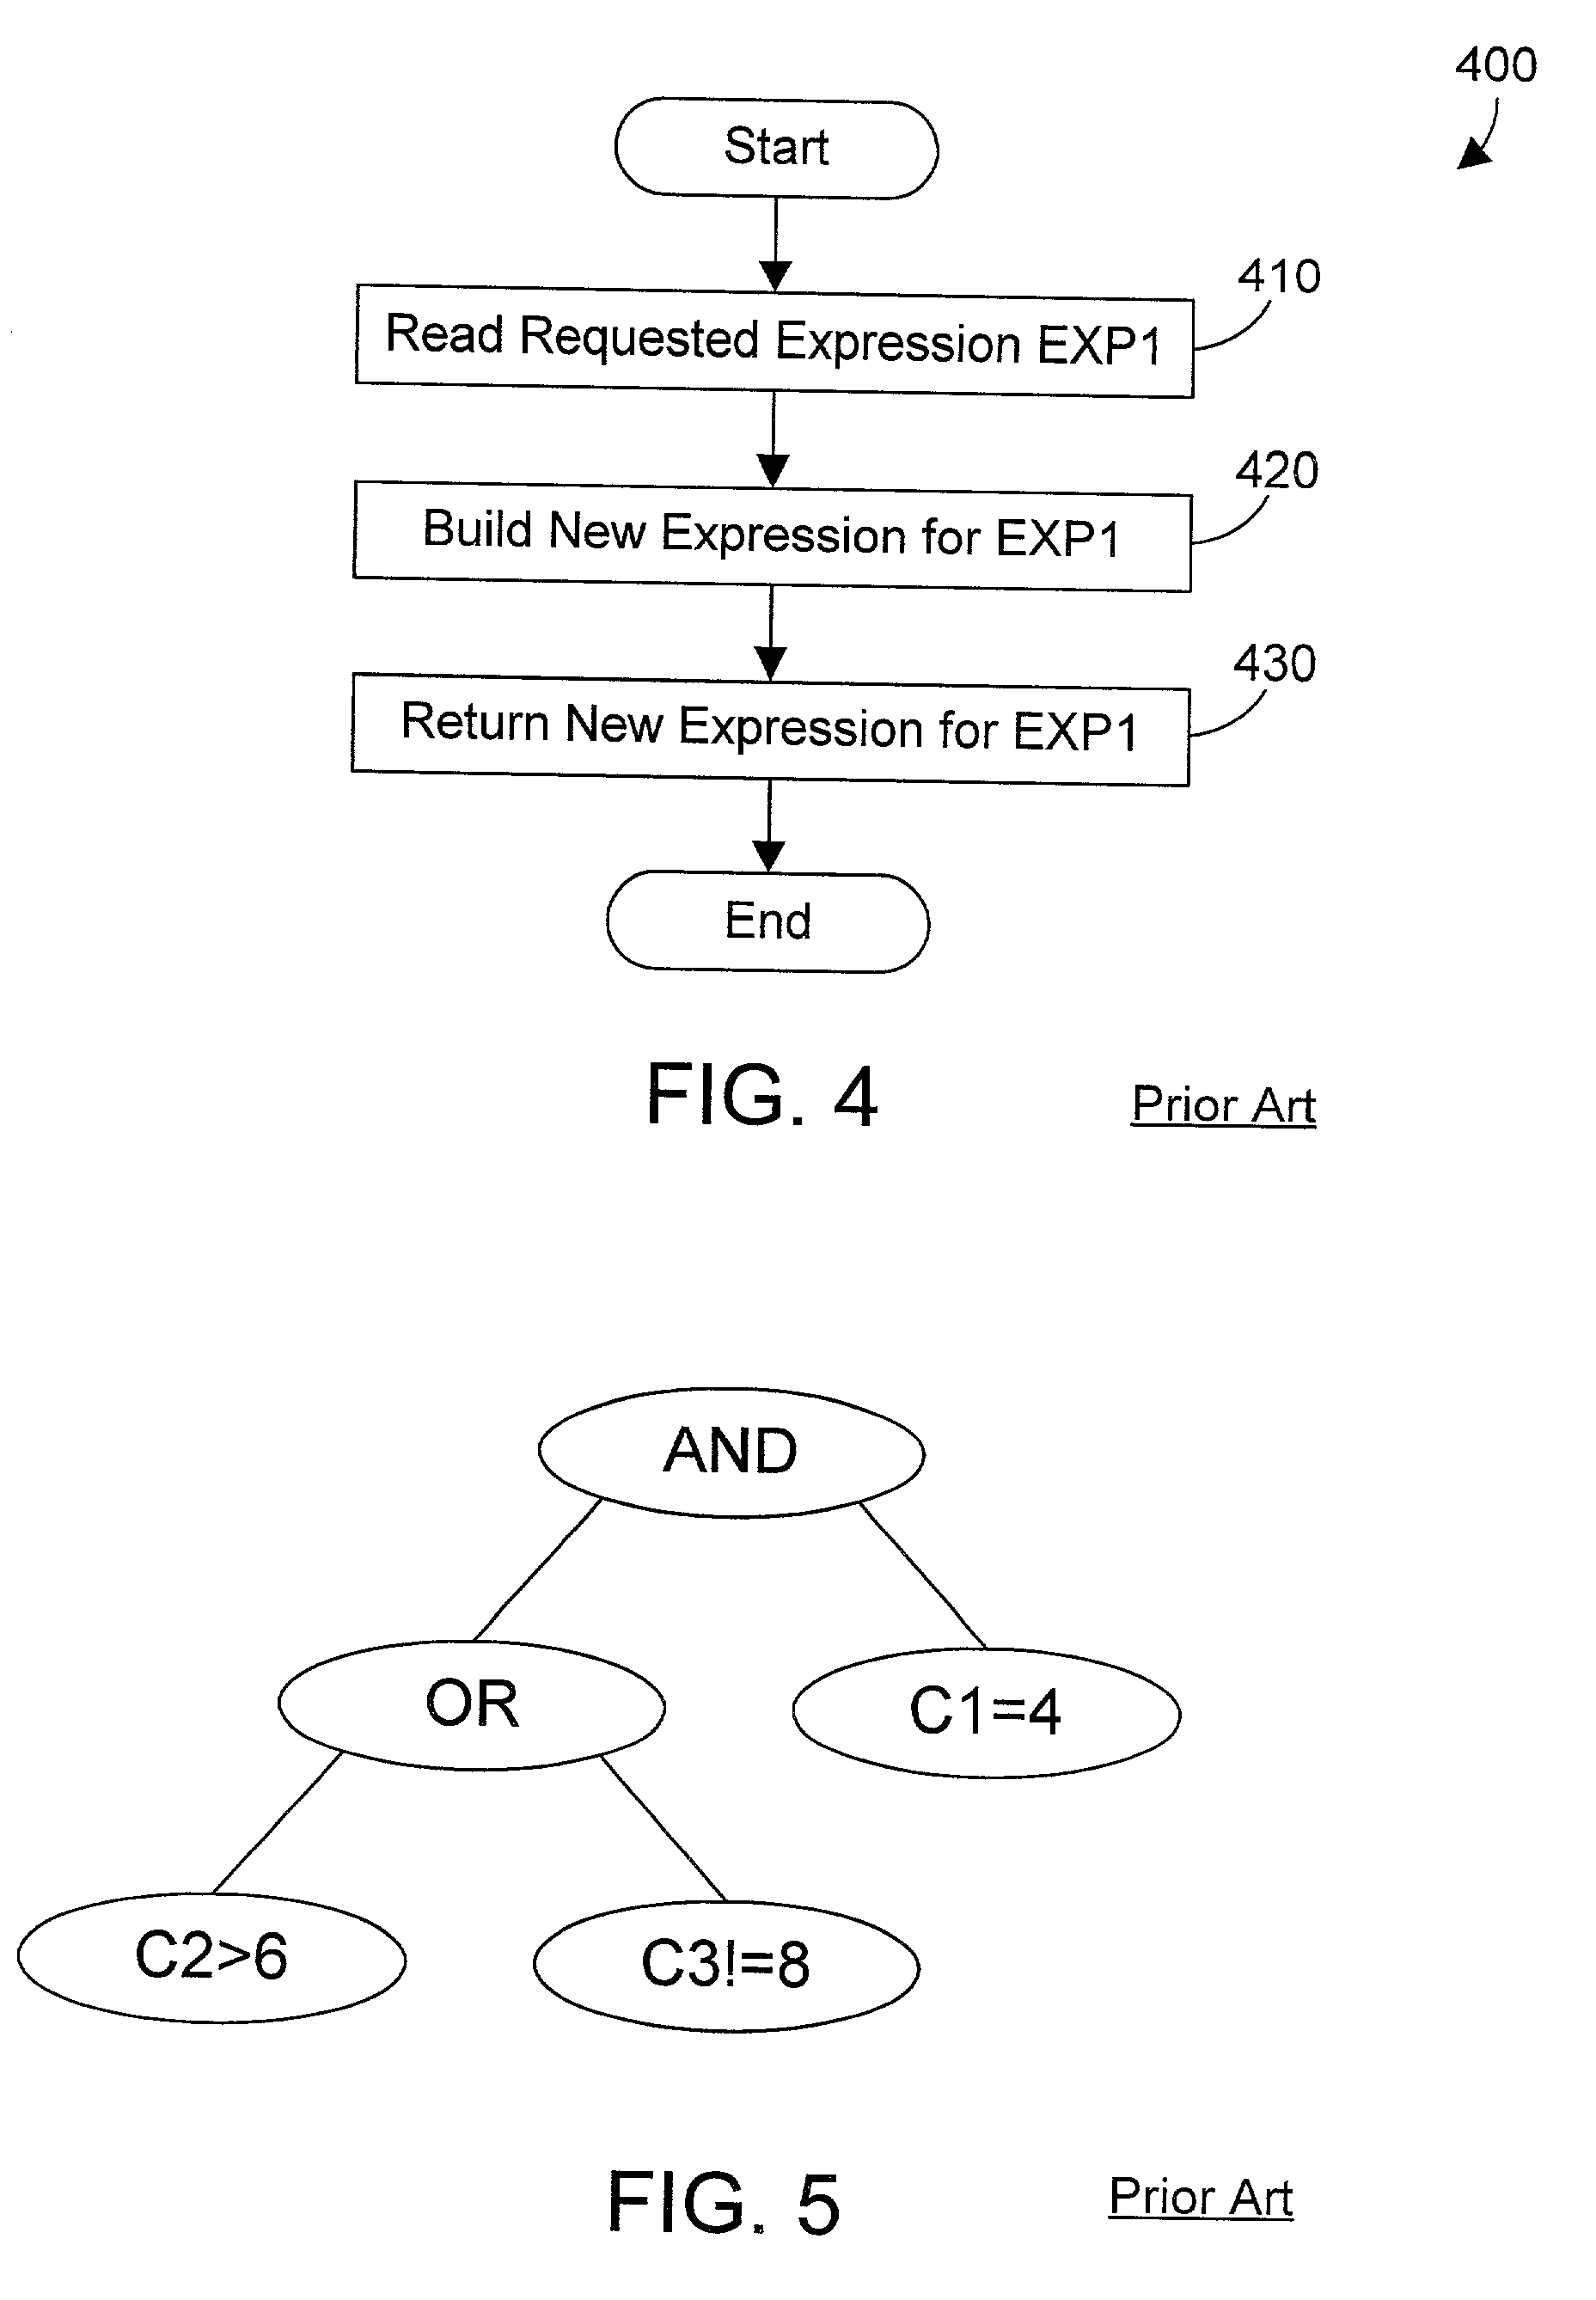 Database query optimization apparatus and method